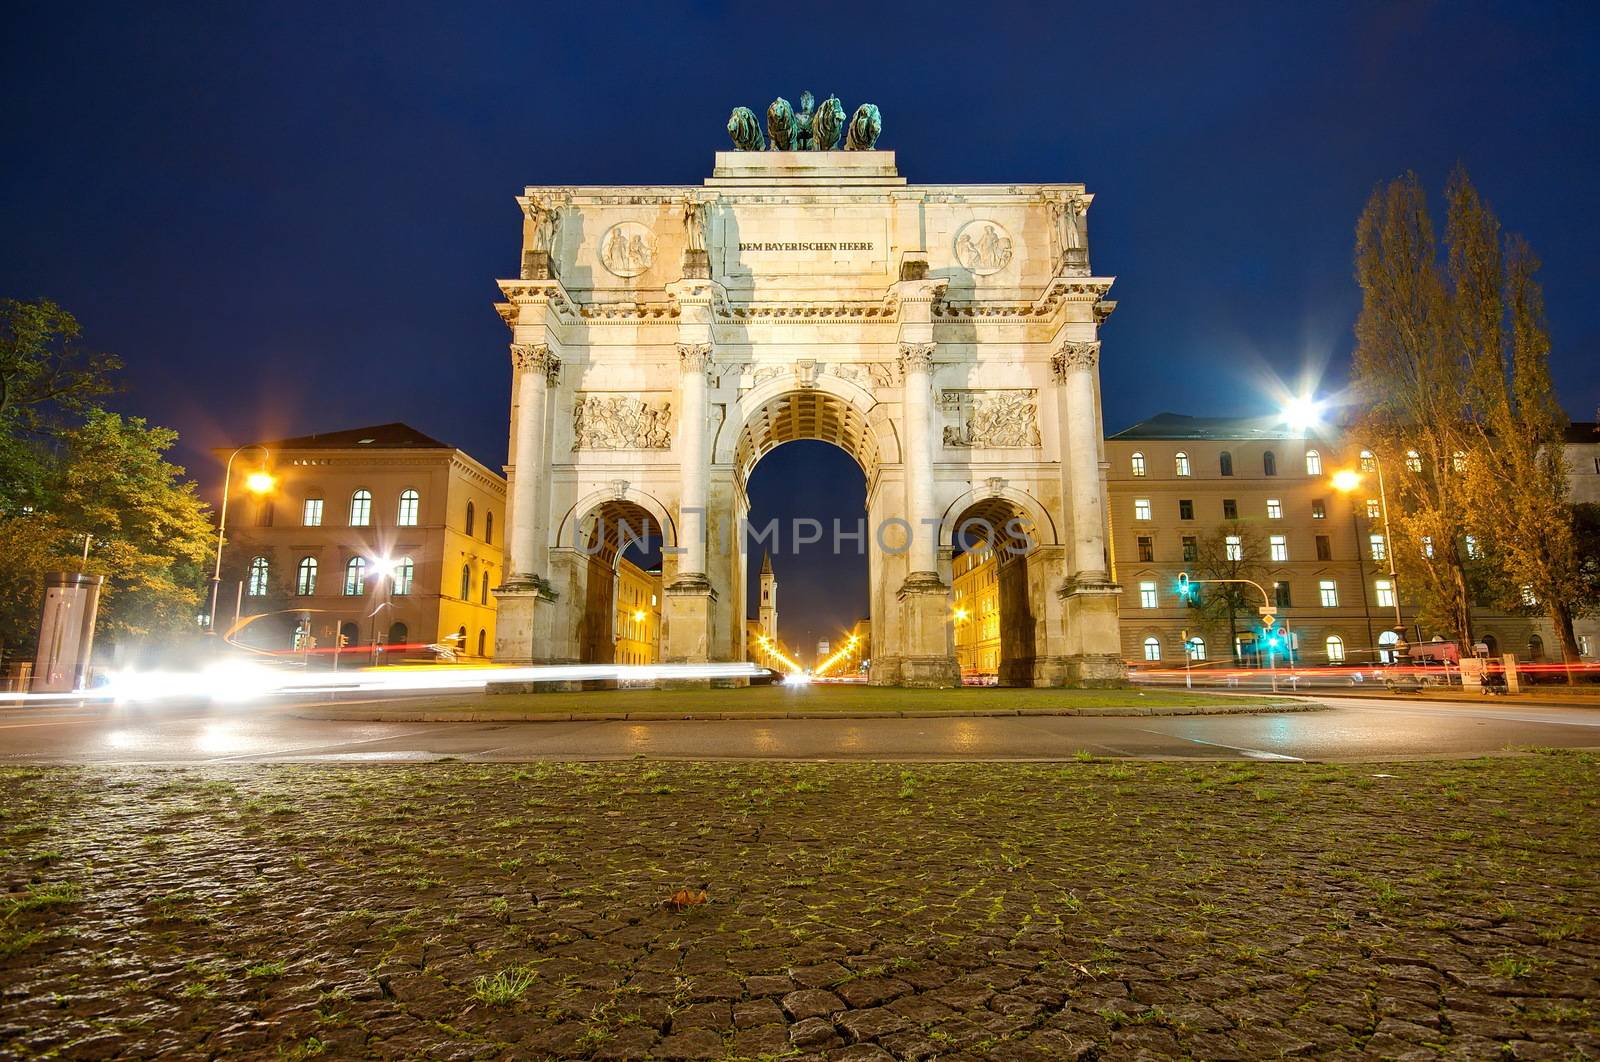 The Siegestor (Victory Gate) at night in Munich, Germany, Europe by anderm